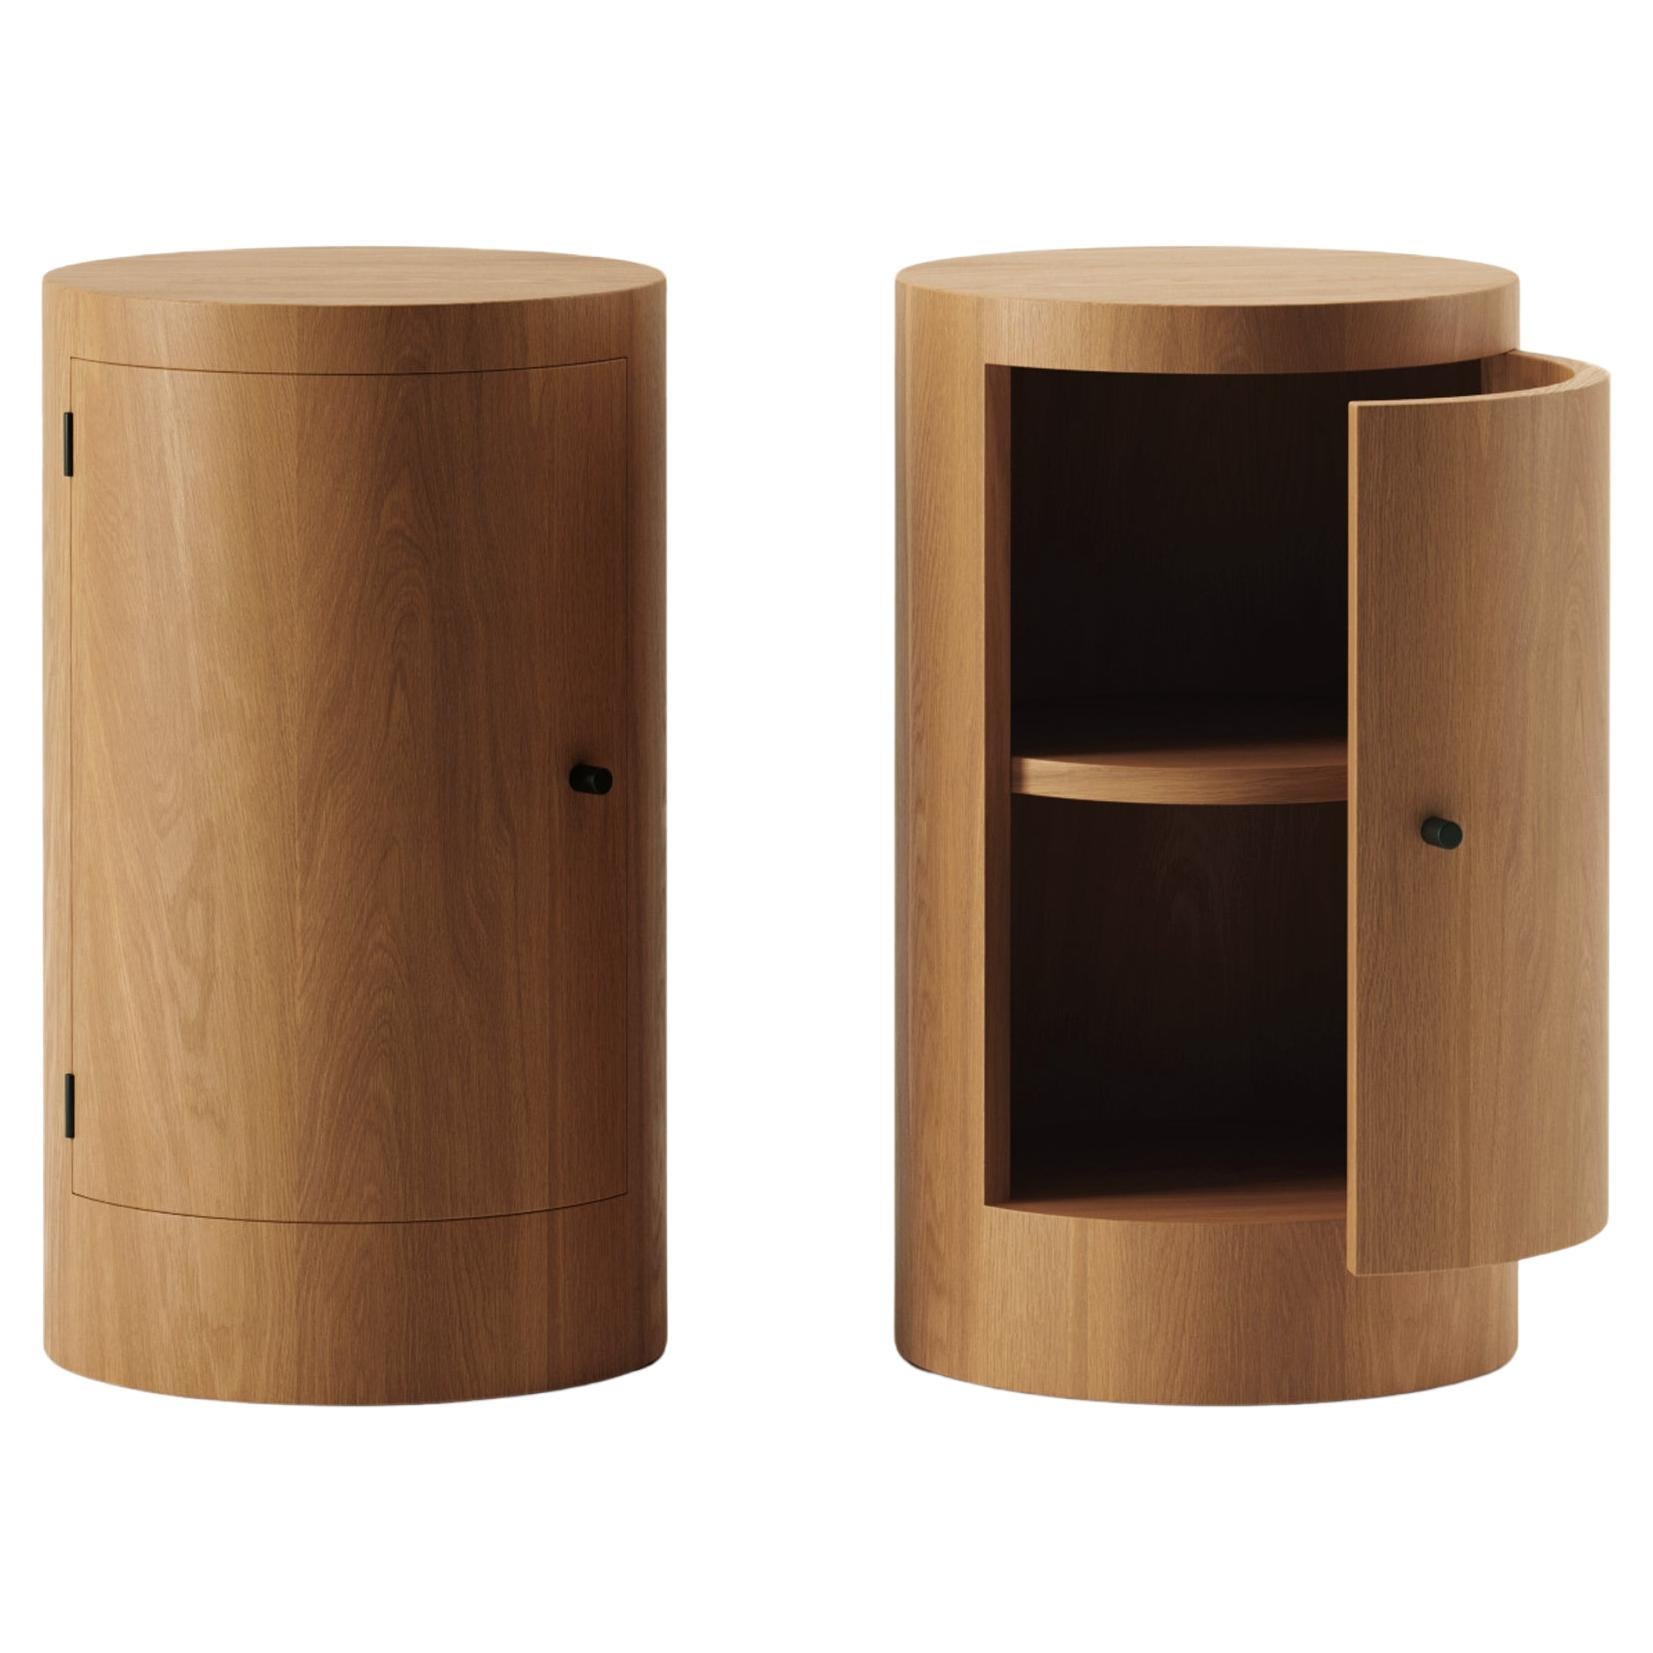 Pair of Constant Night Stands in Iroko Wood by Master Studio for Lemon For Sale